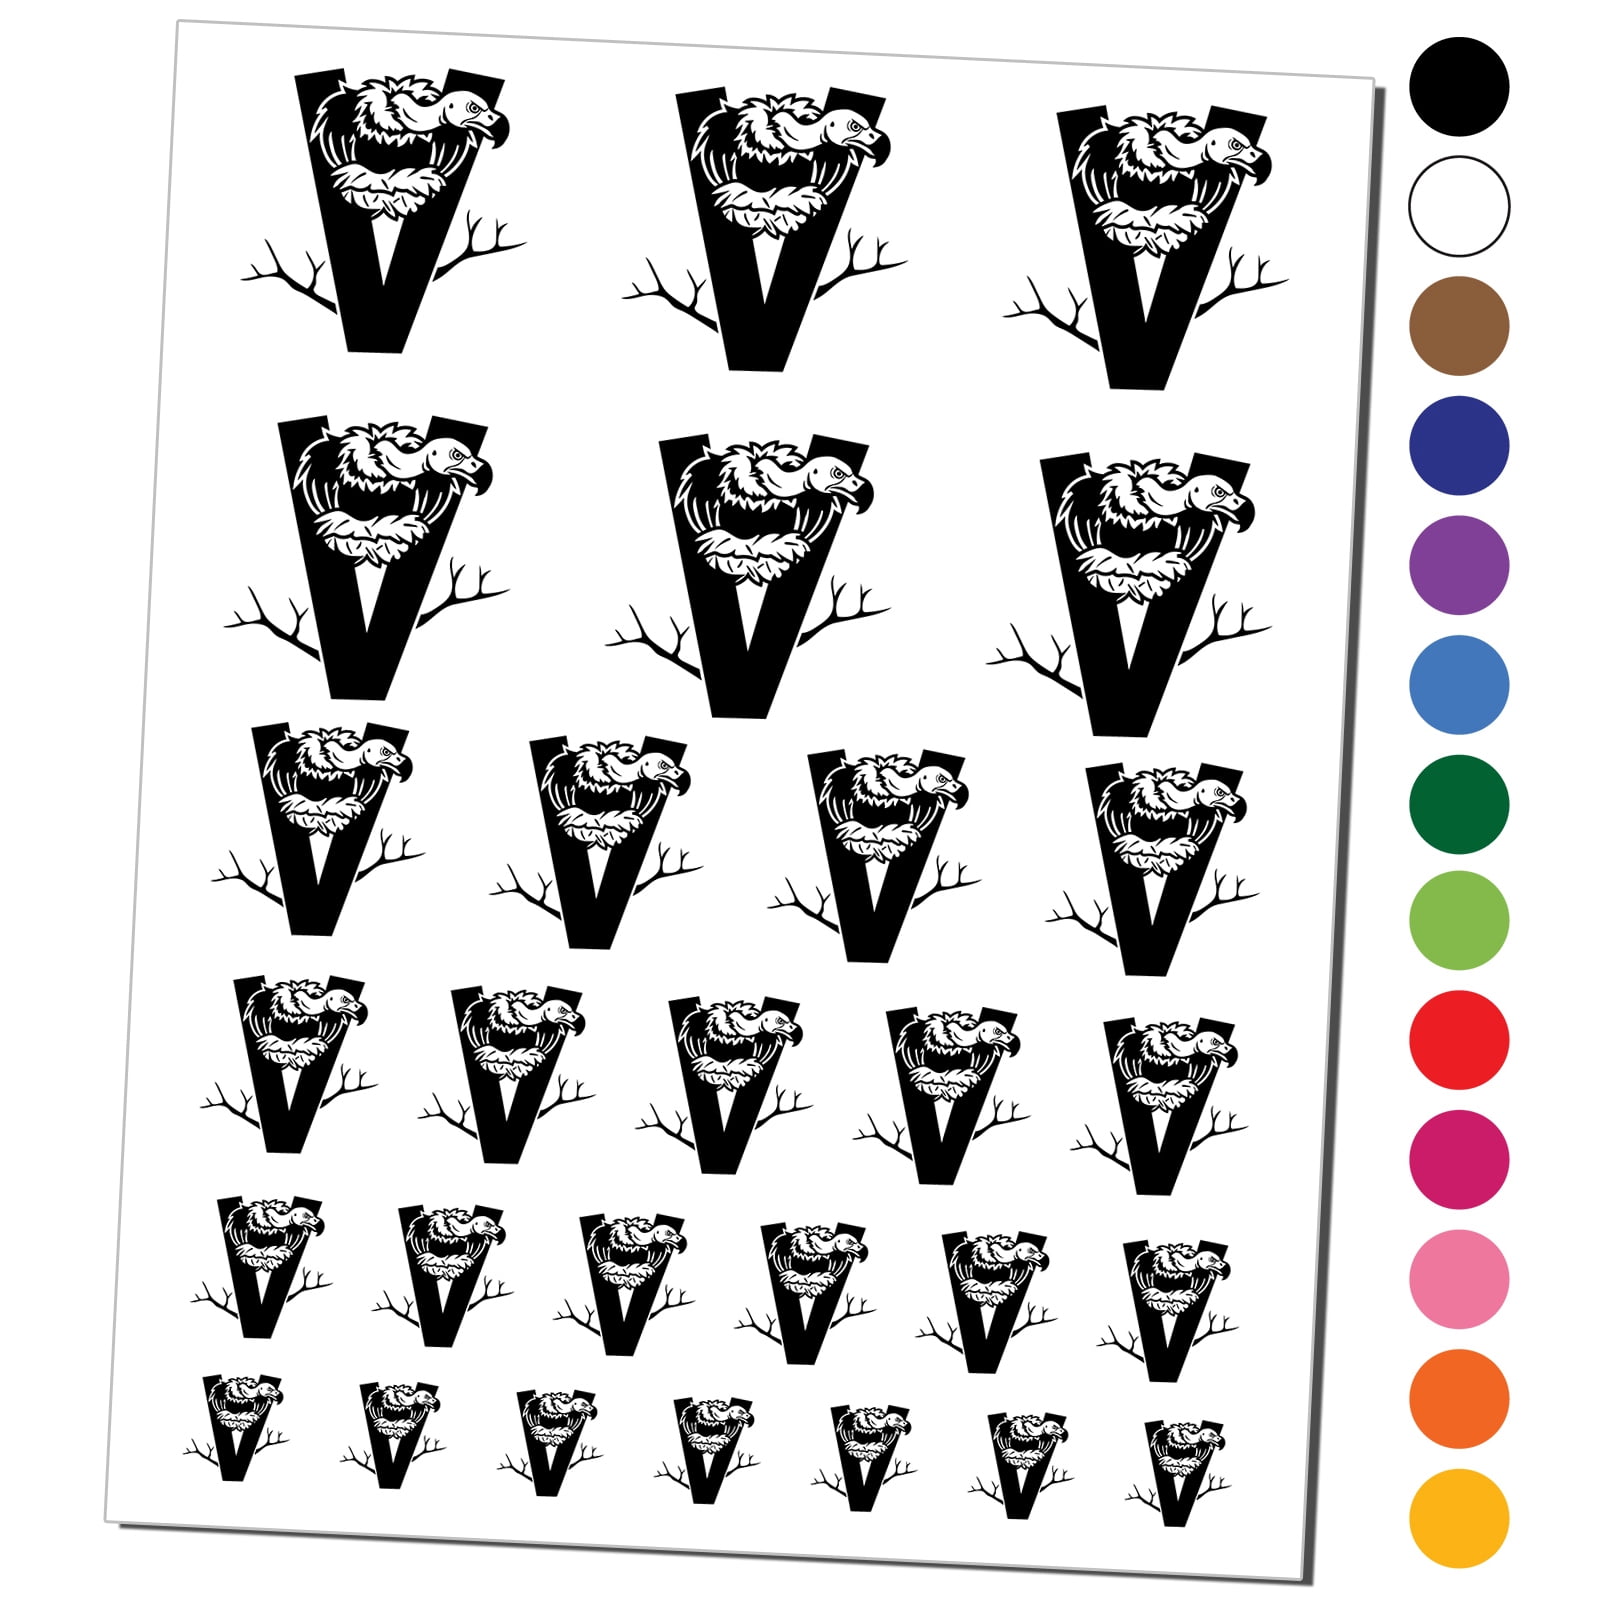 Animal Alphabet Letter V for Vulture Water Resistant Temporary Tattoo Set  Fake Body Art Collection - Black 